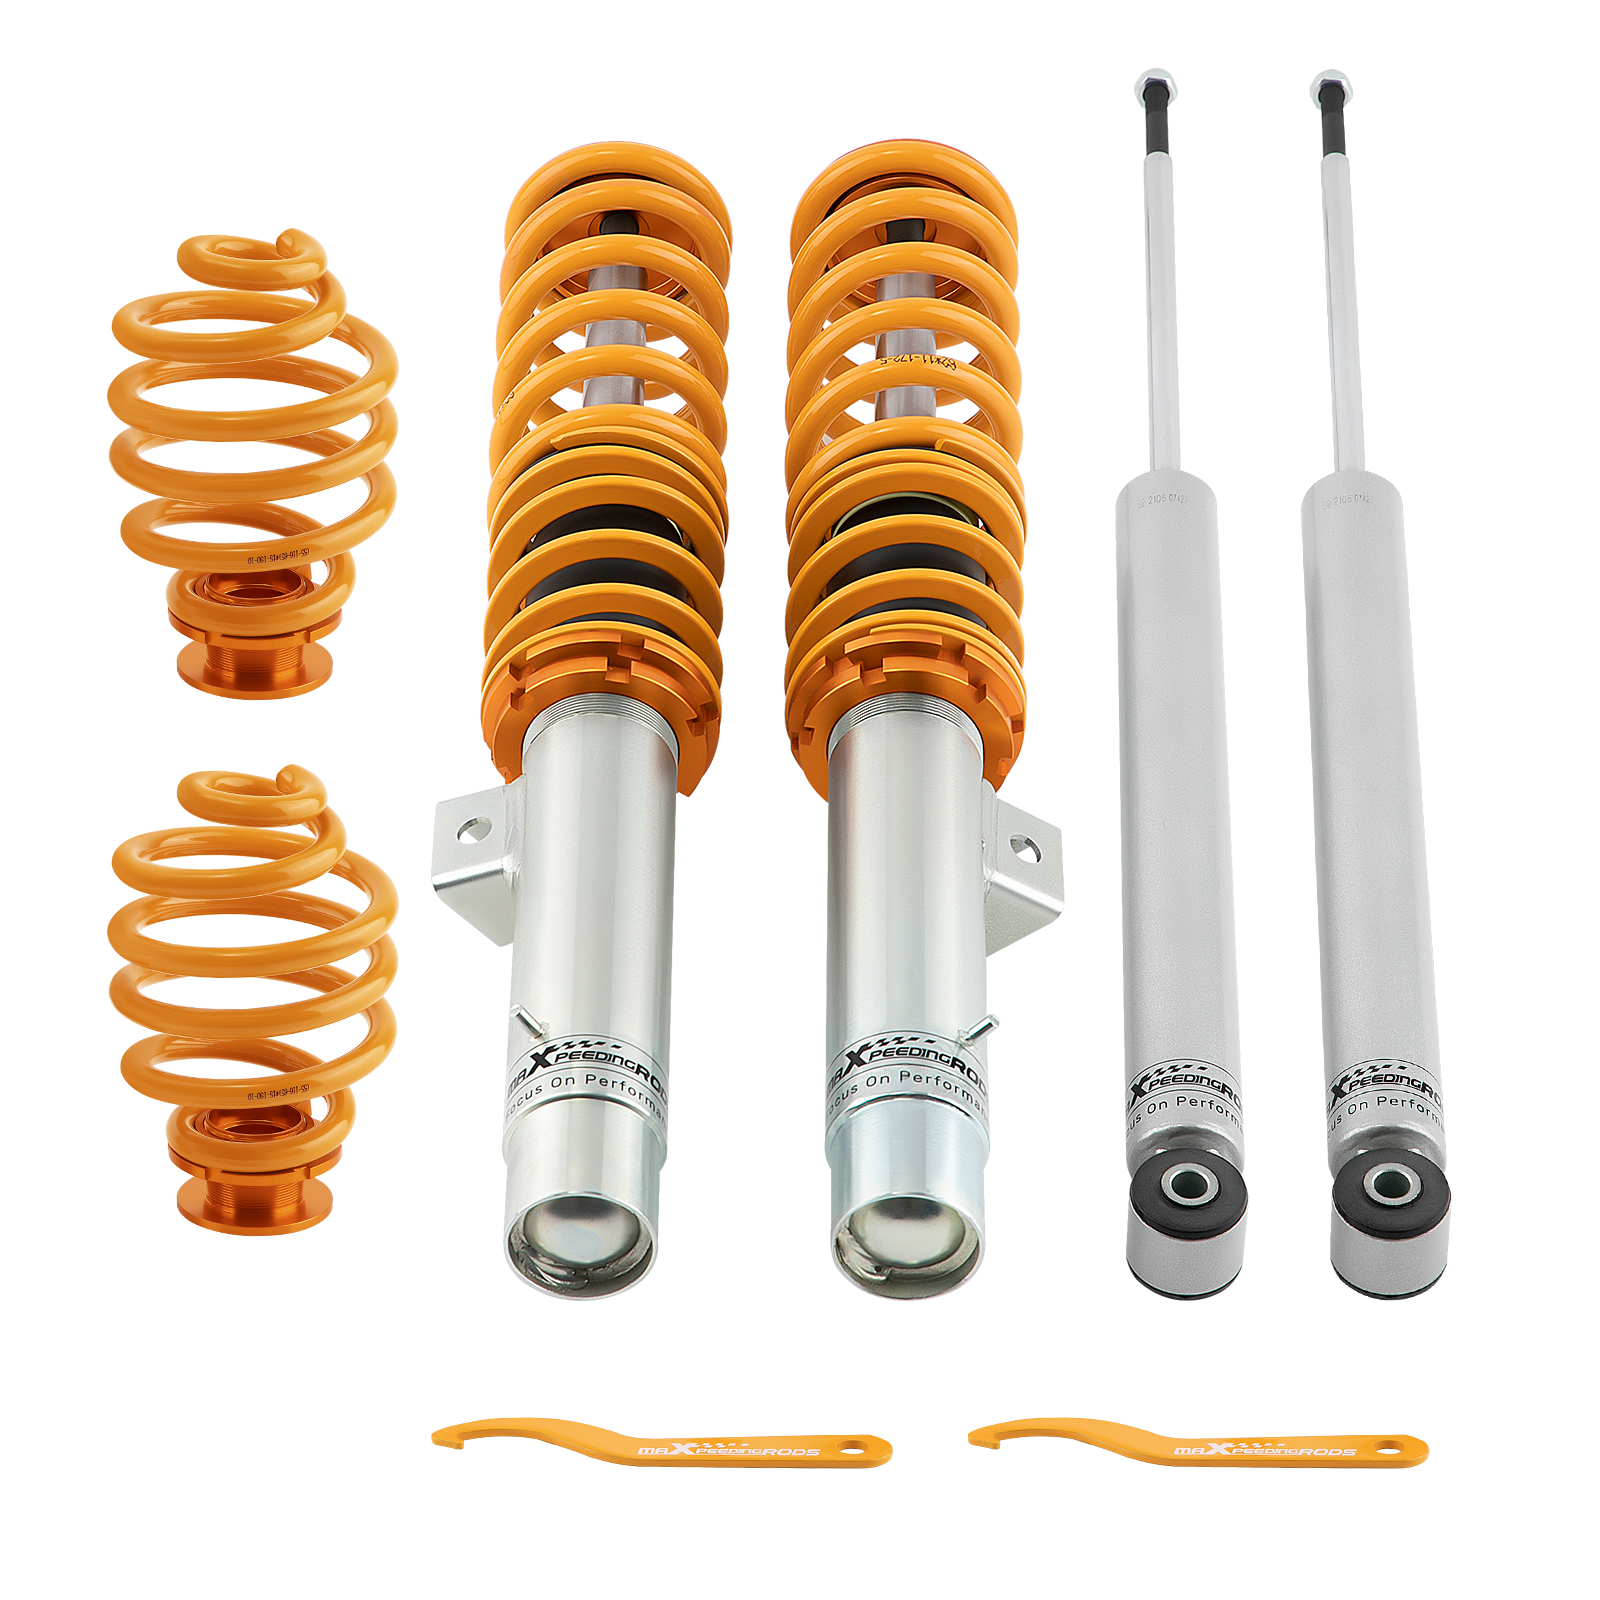 Coilover Kit for BMW 3 Convertible 316i-330i 318d-330d E46, 2000-2007